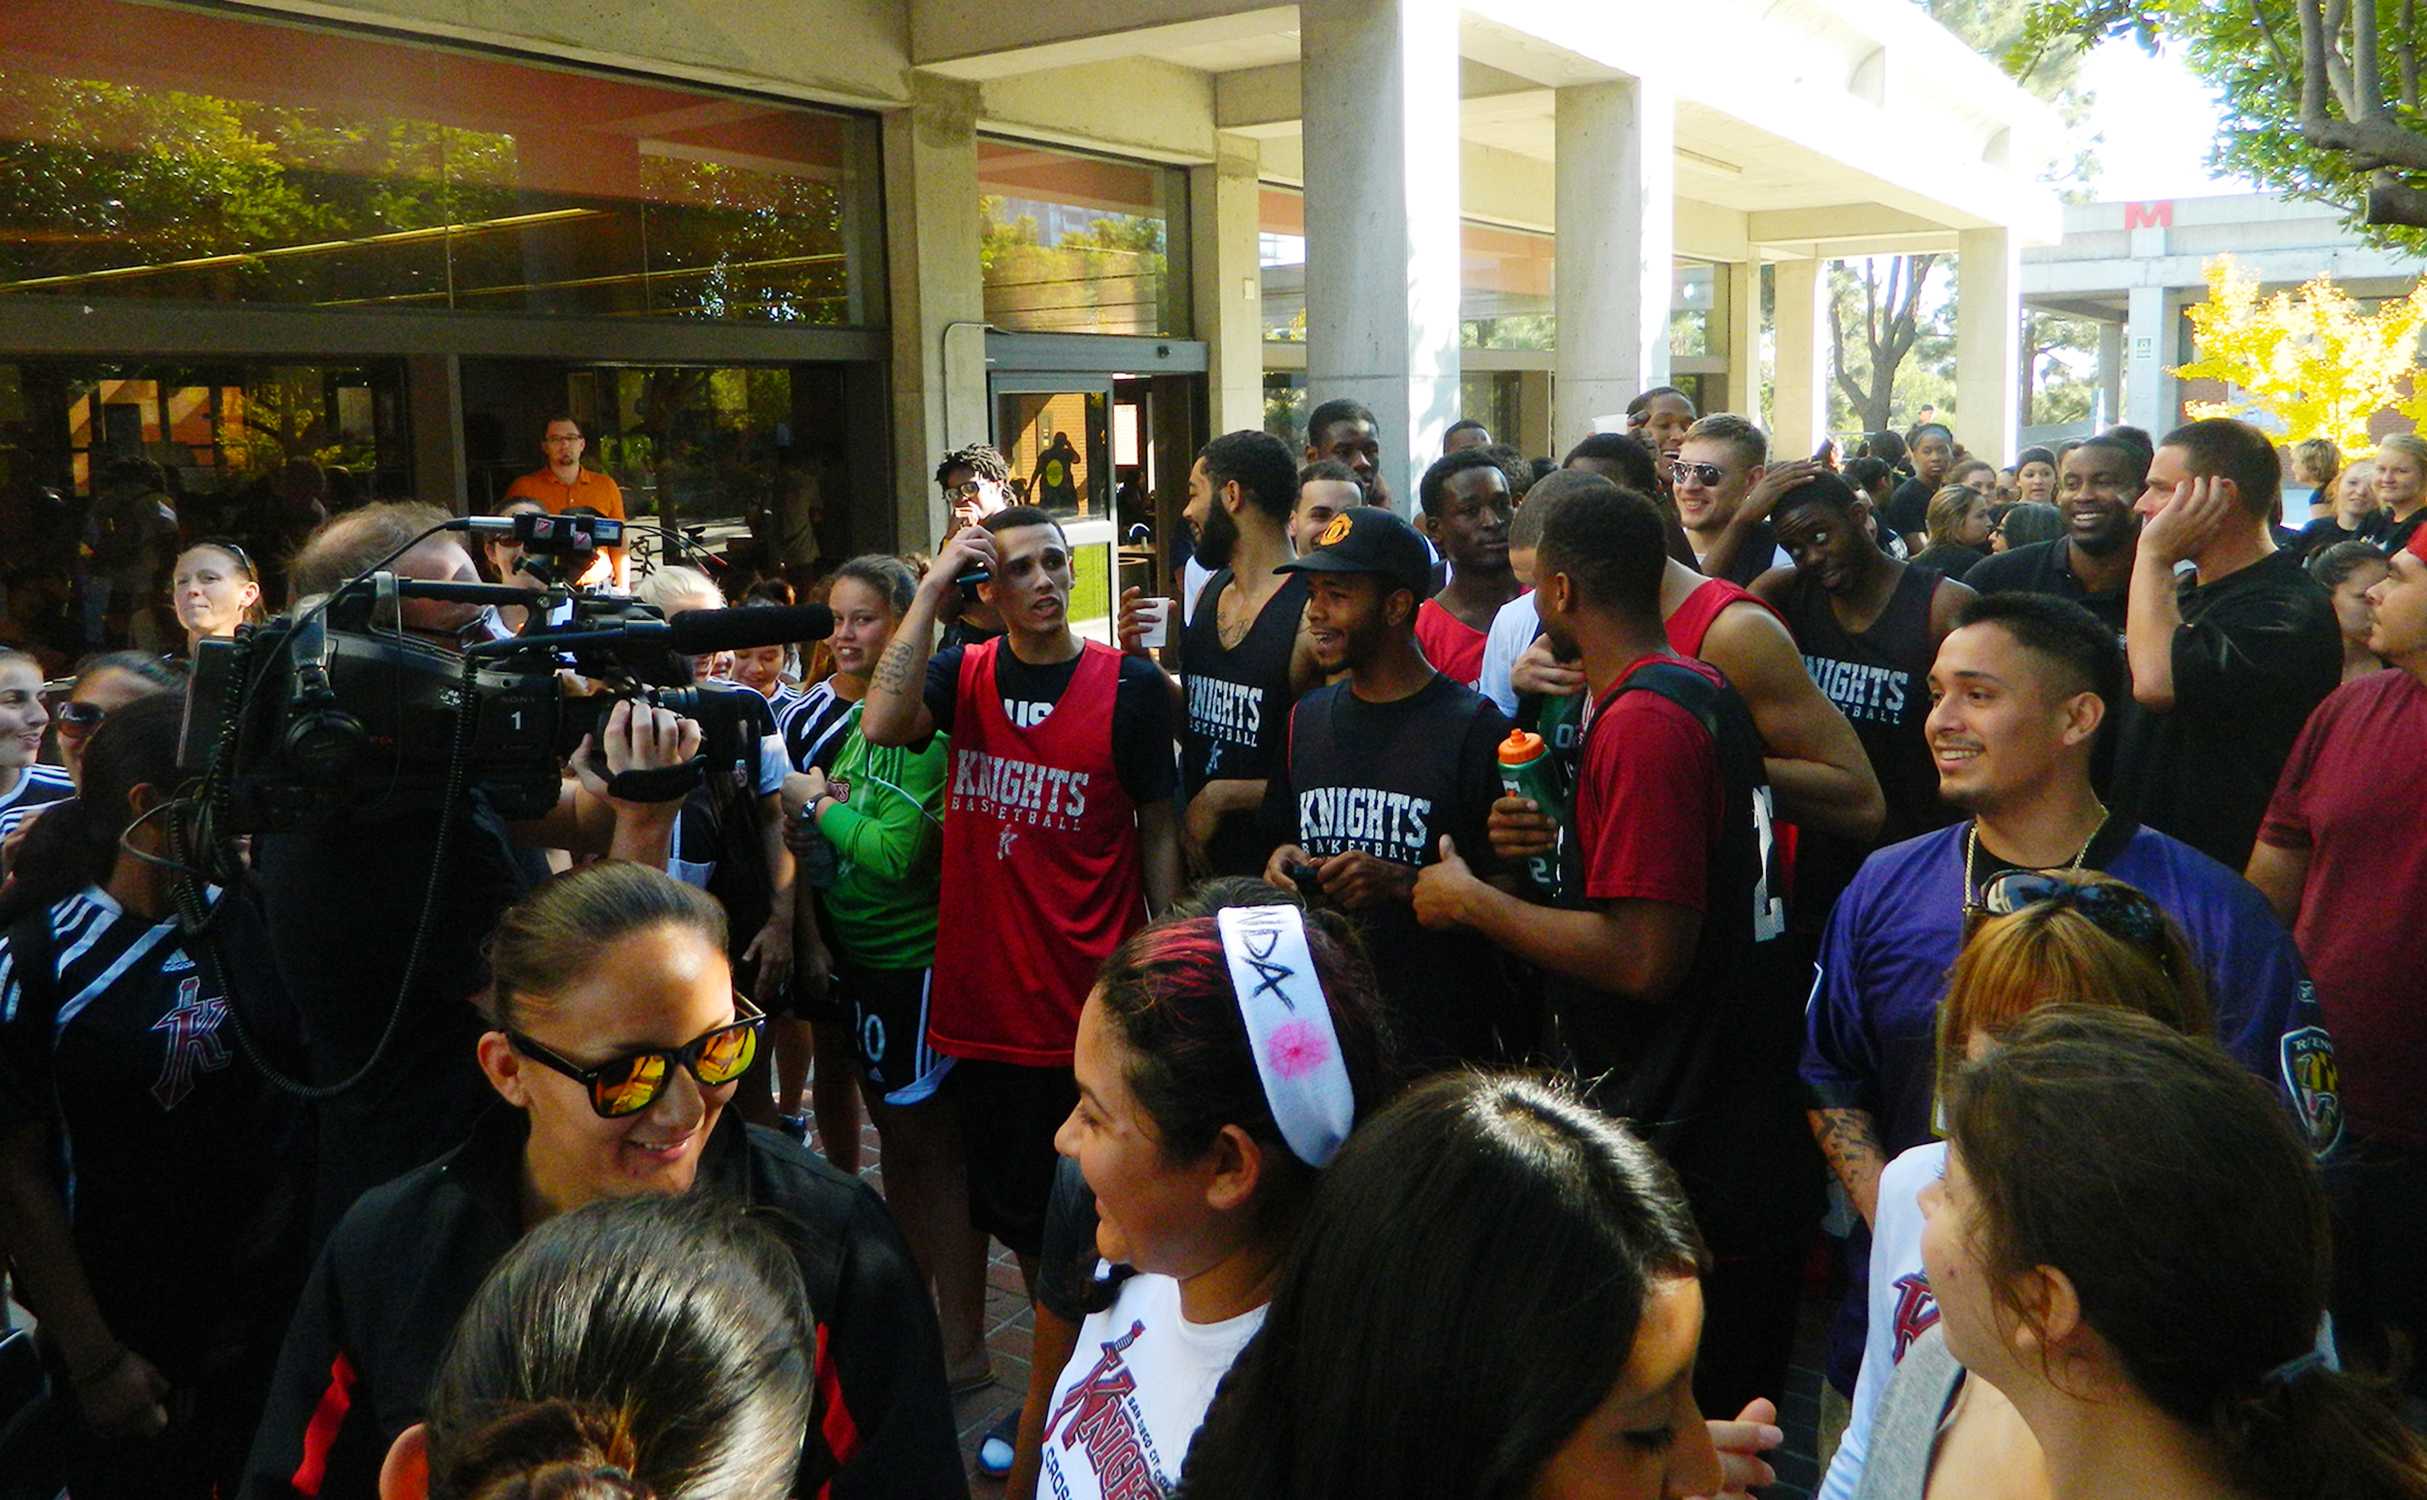 The basketball team, other Lady Knights squads, faculty, local media and students prior to the 2K Fun Run that started in the Gorton Quad and wound through campus. Chris Handloser, City Times.